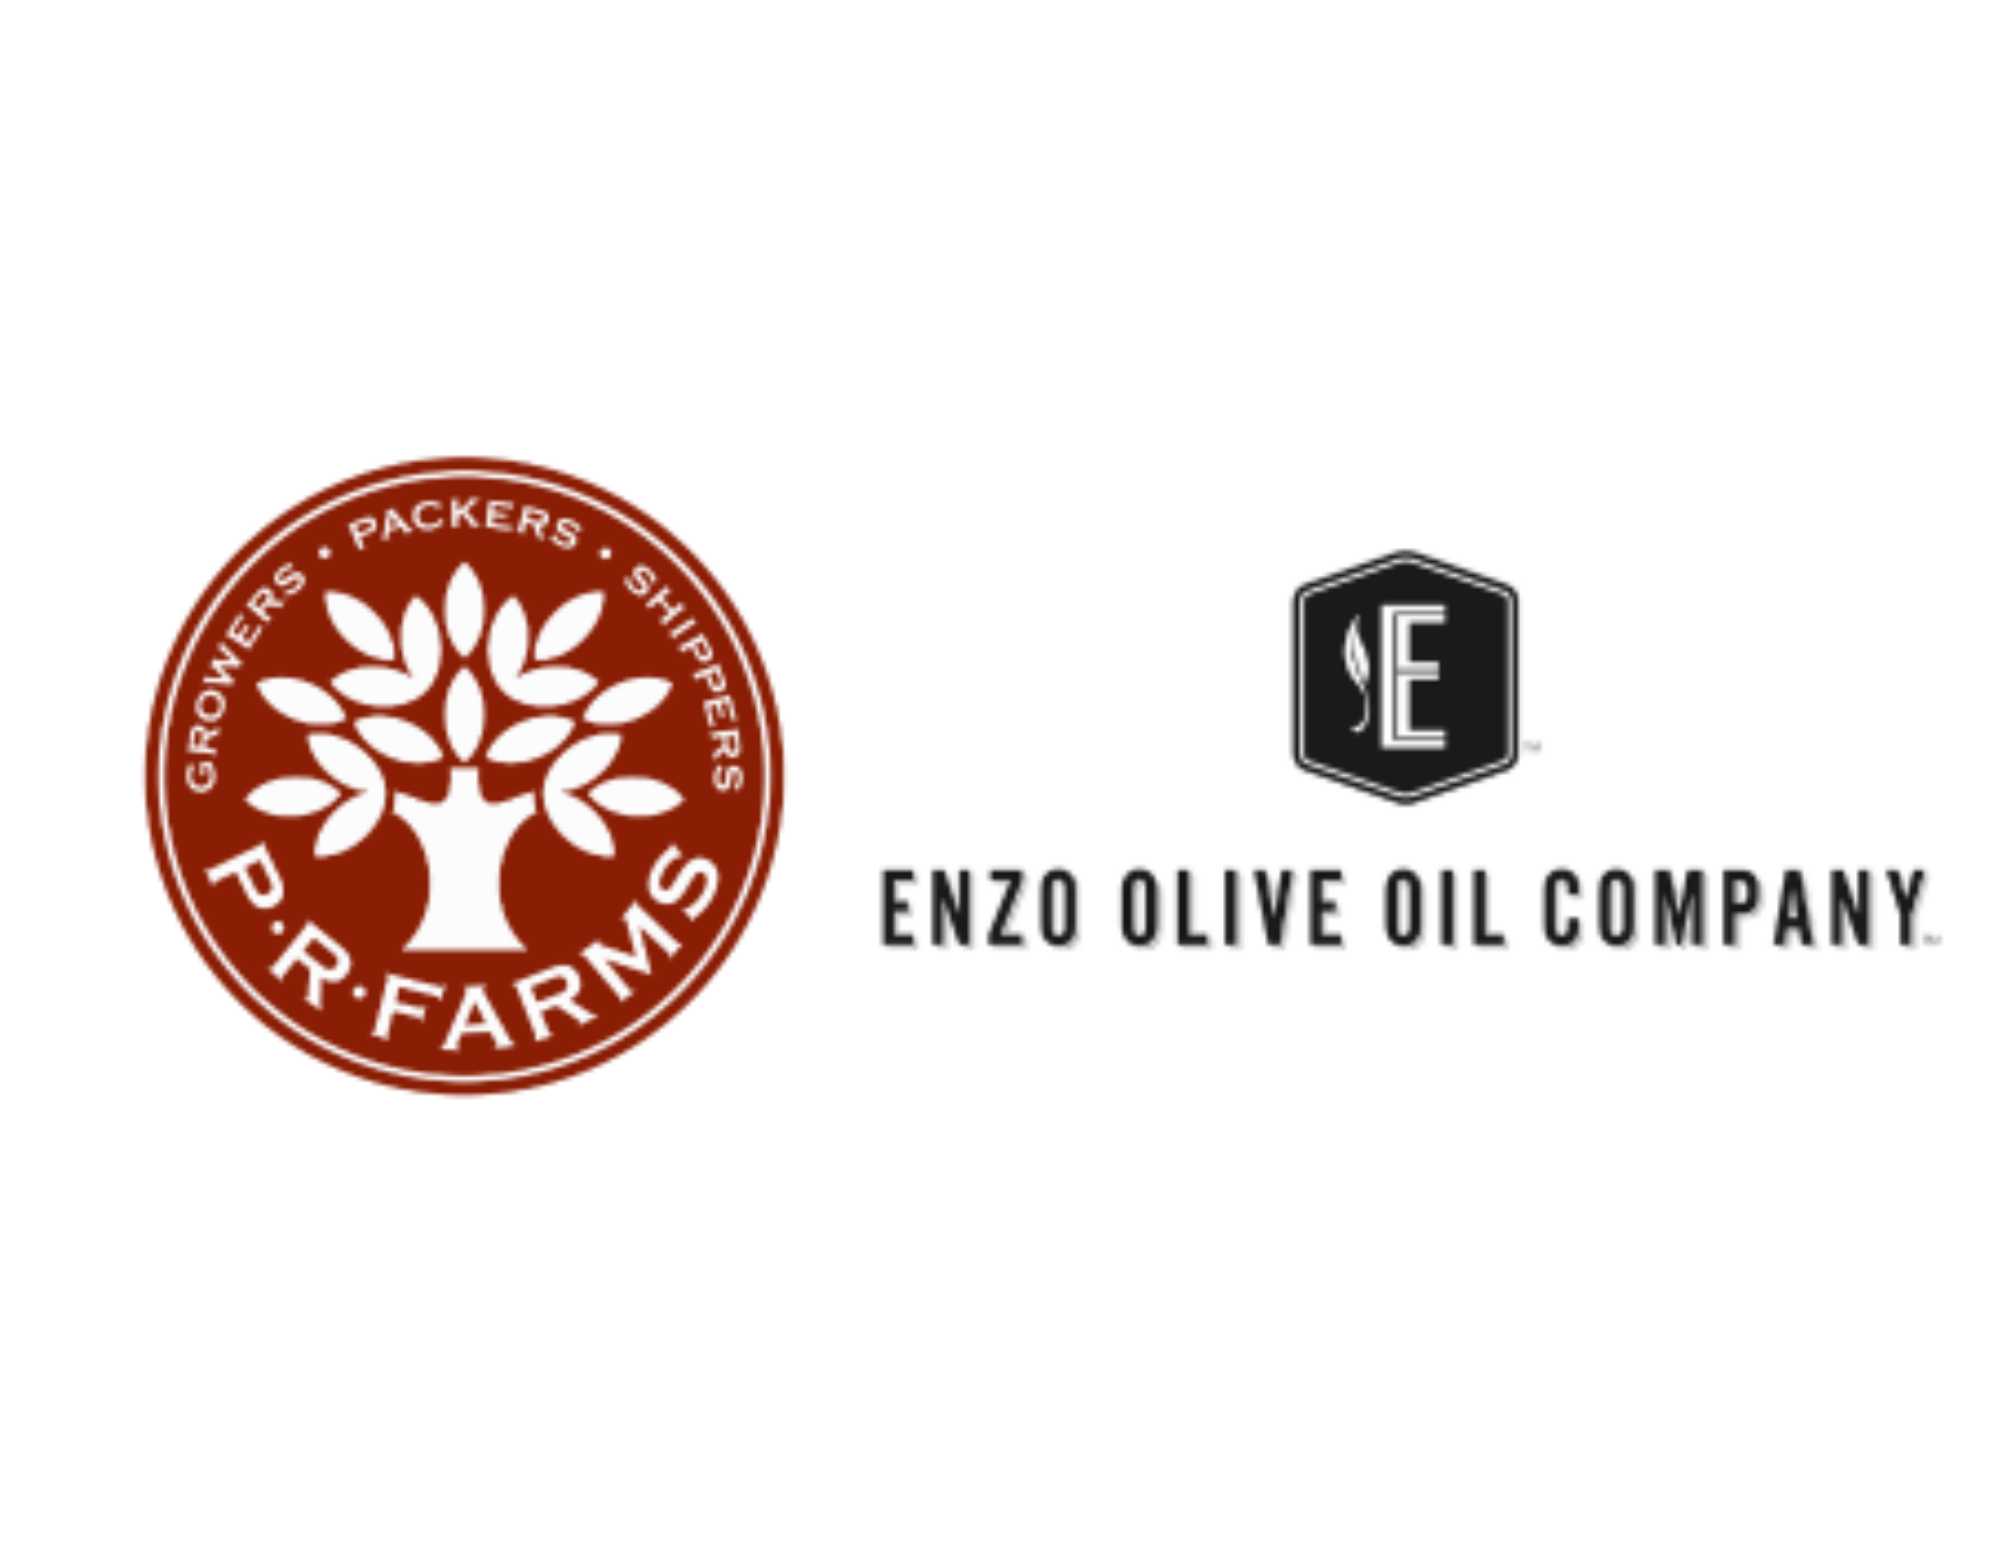 P-R Farms and ENZO Olive Oil